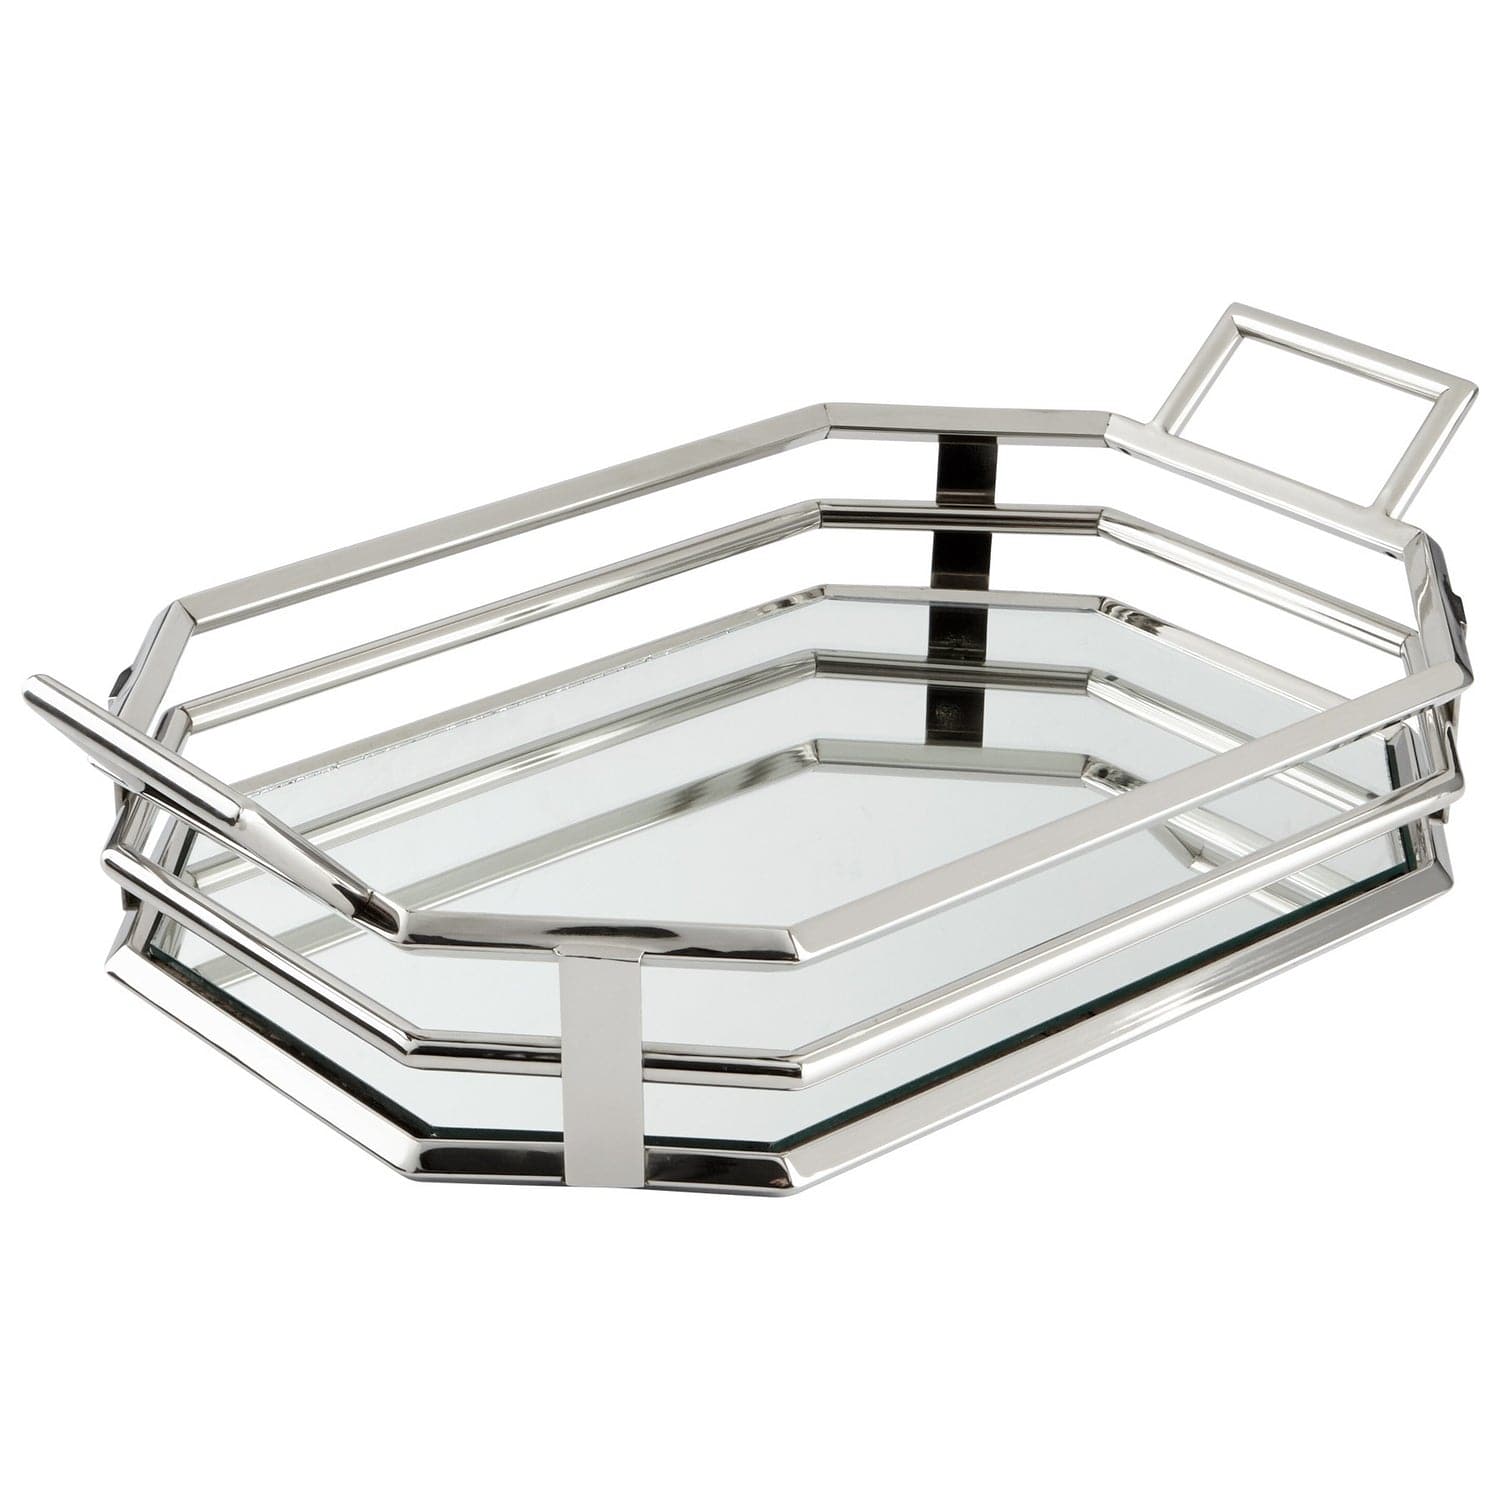 Cyan - 08265 - Tray - Stainless Steel